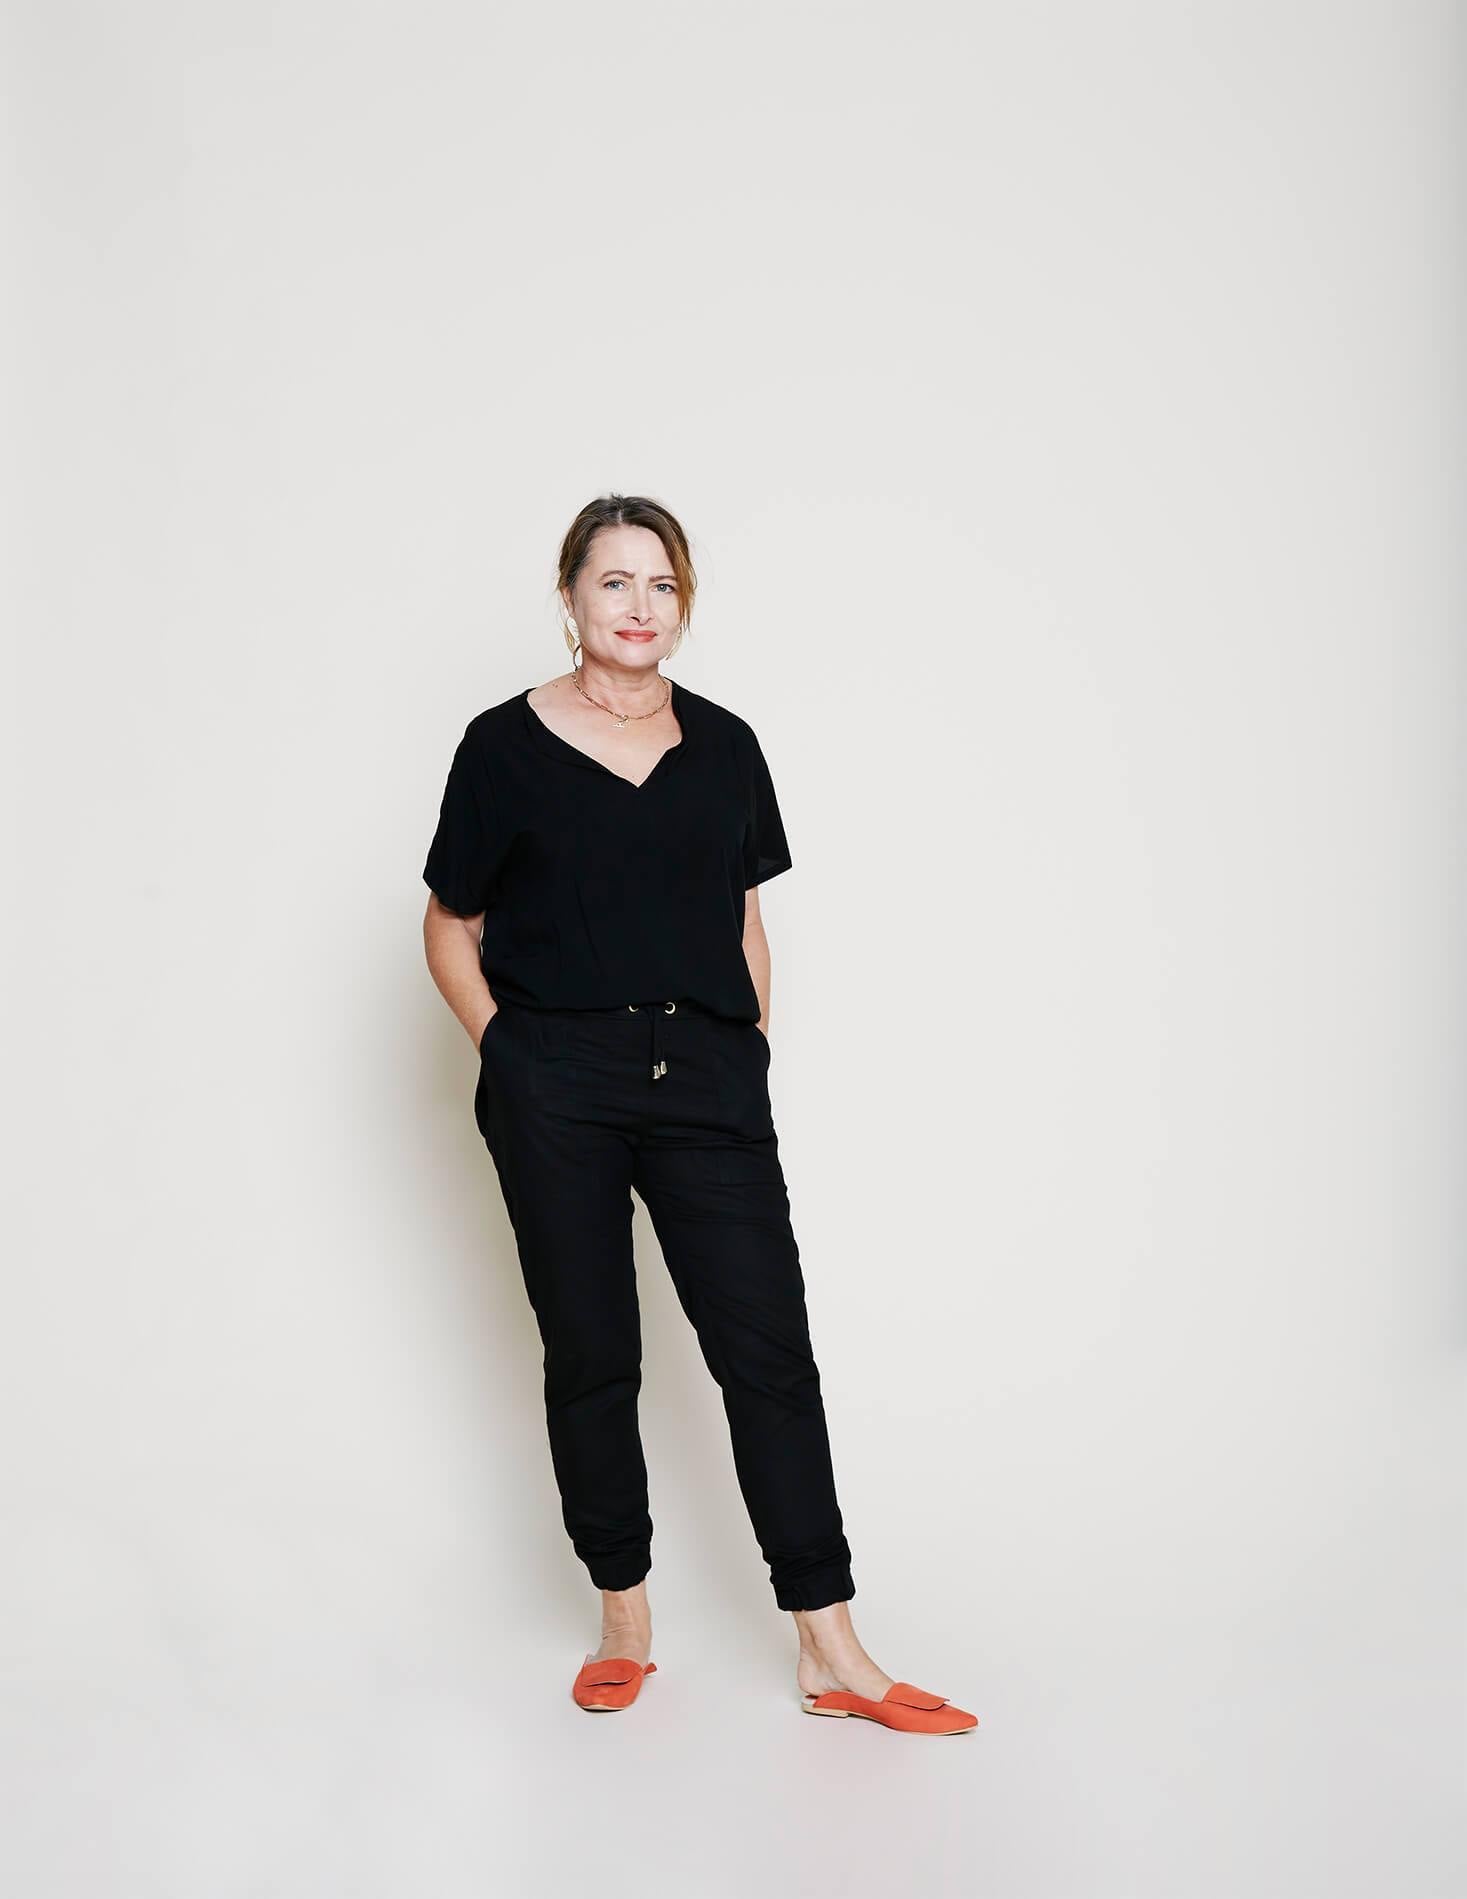 Our Black Emma Pants made from a linen rayon blend - a Classic linen pants meets tracksuit. Paired with our morning top and fold over mules